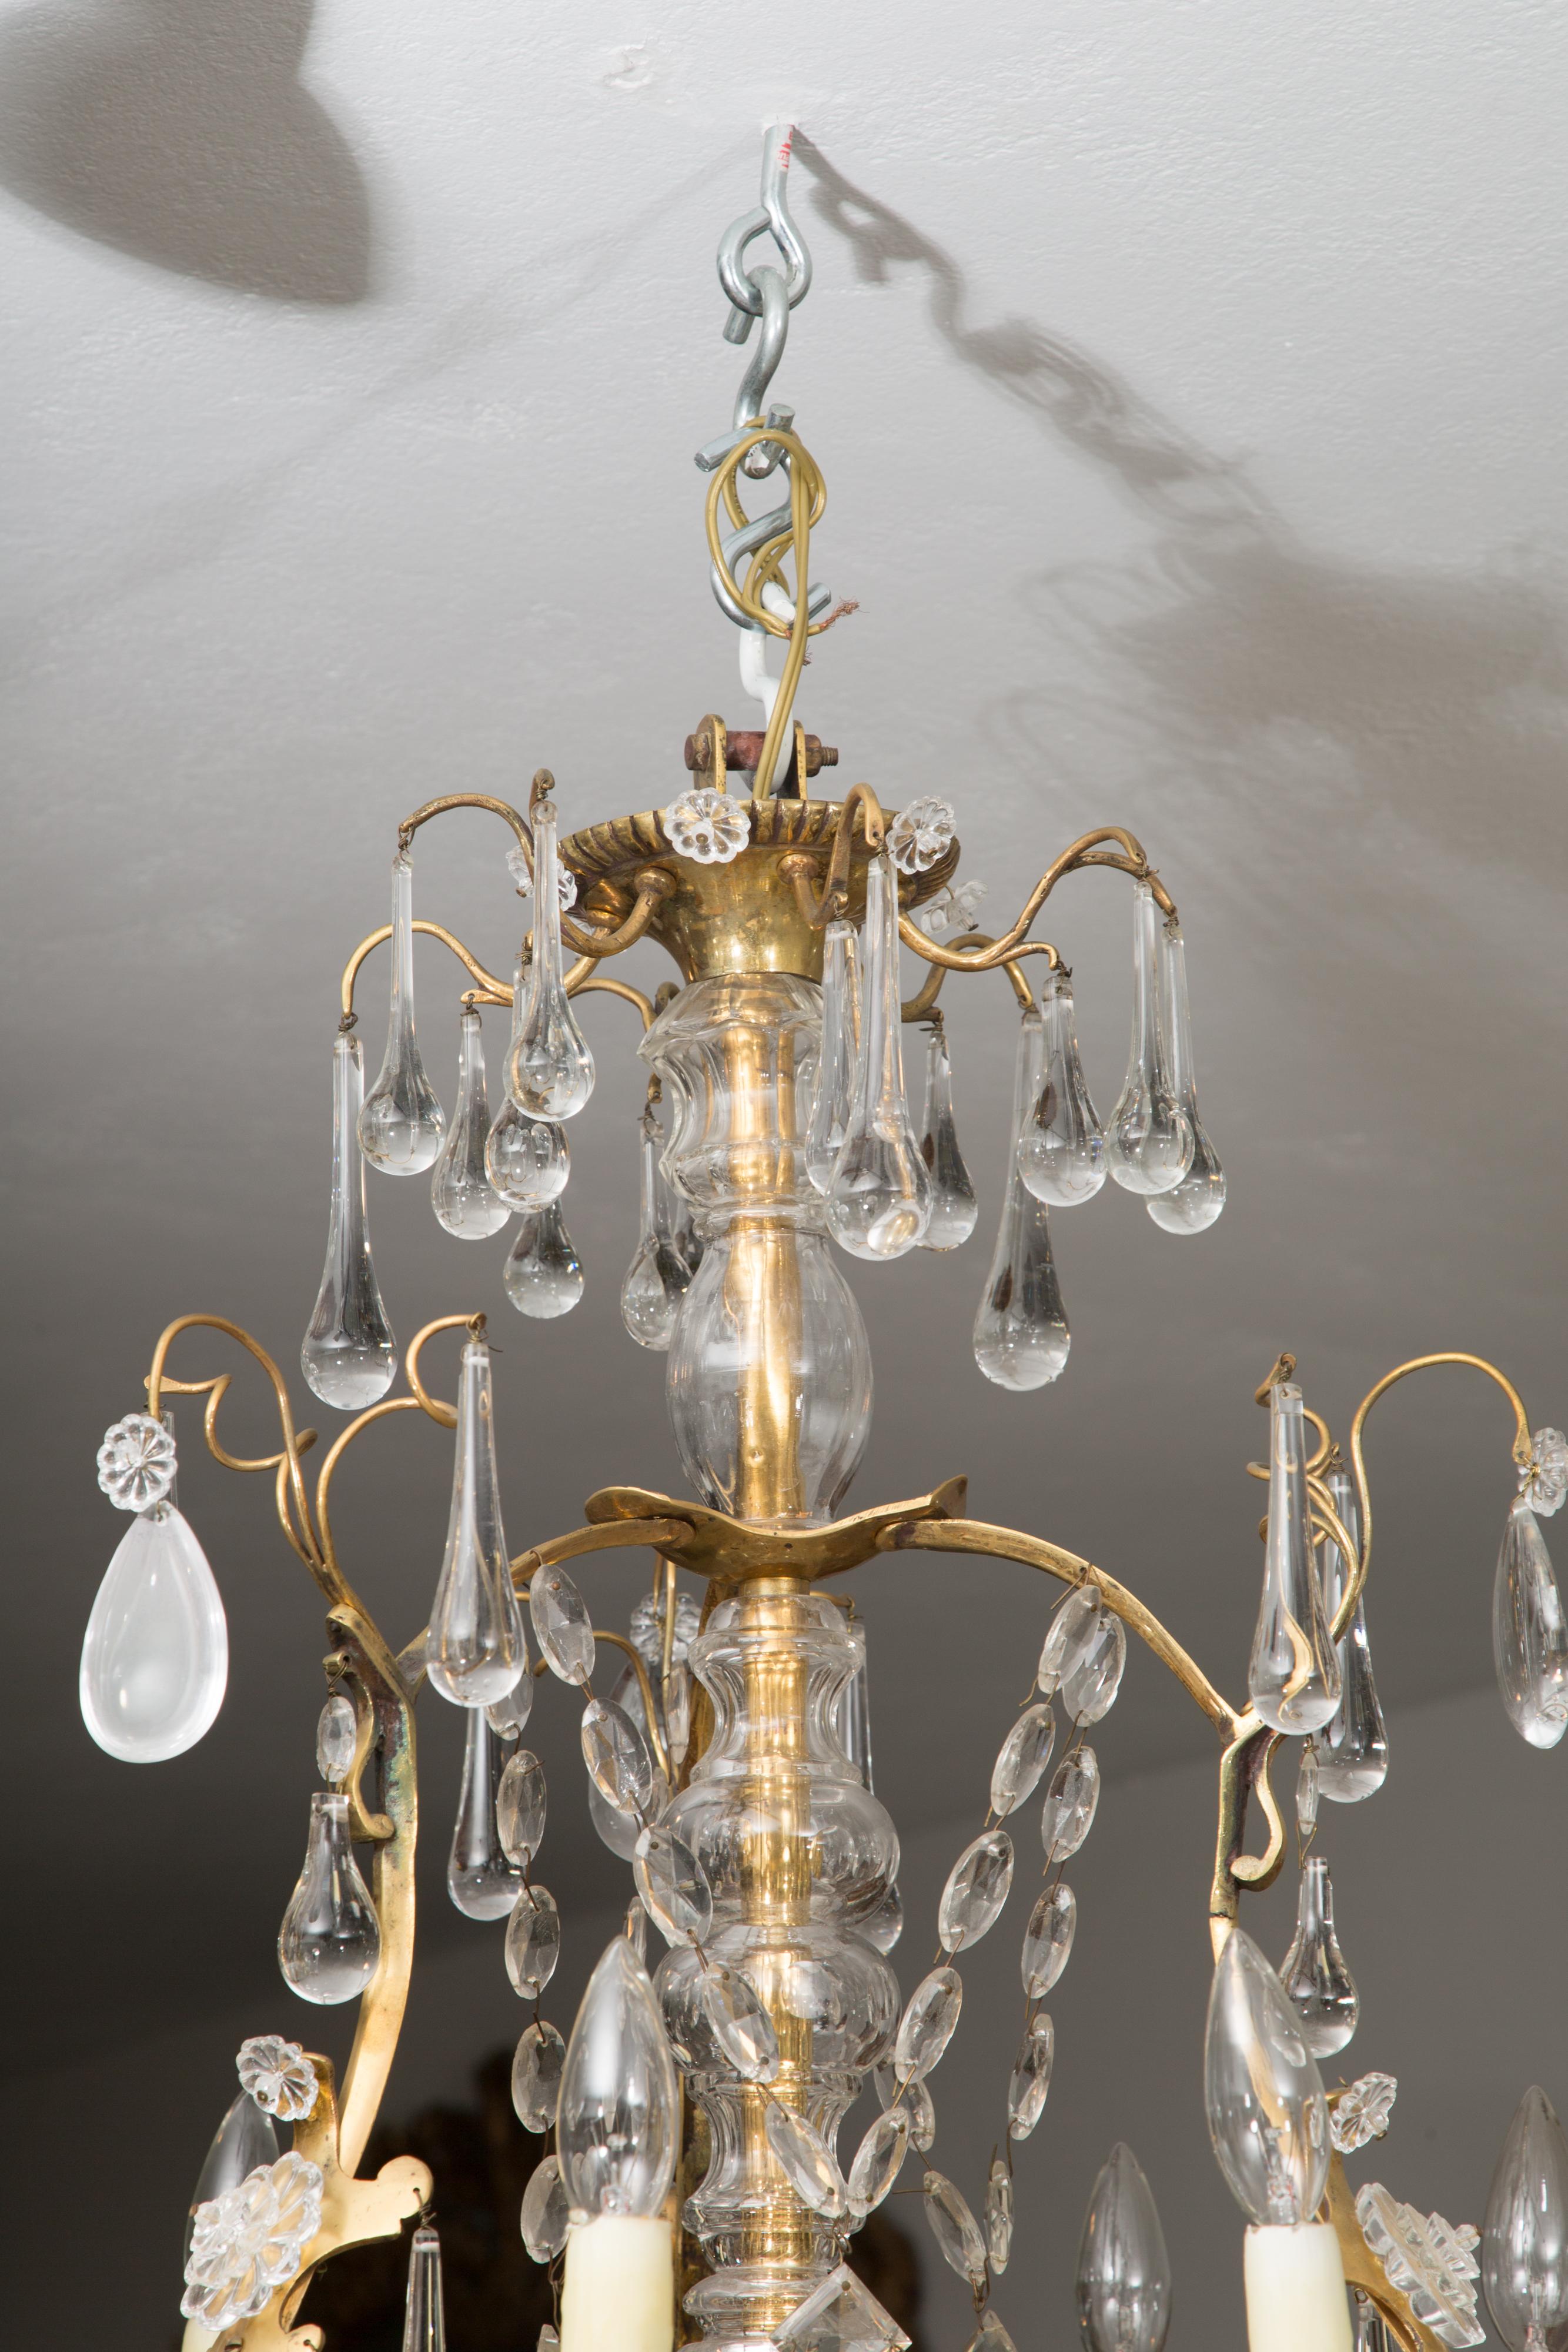 French Birdcage Chandelier with Crystal Drops 1